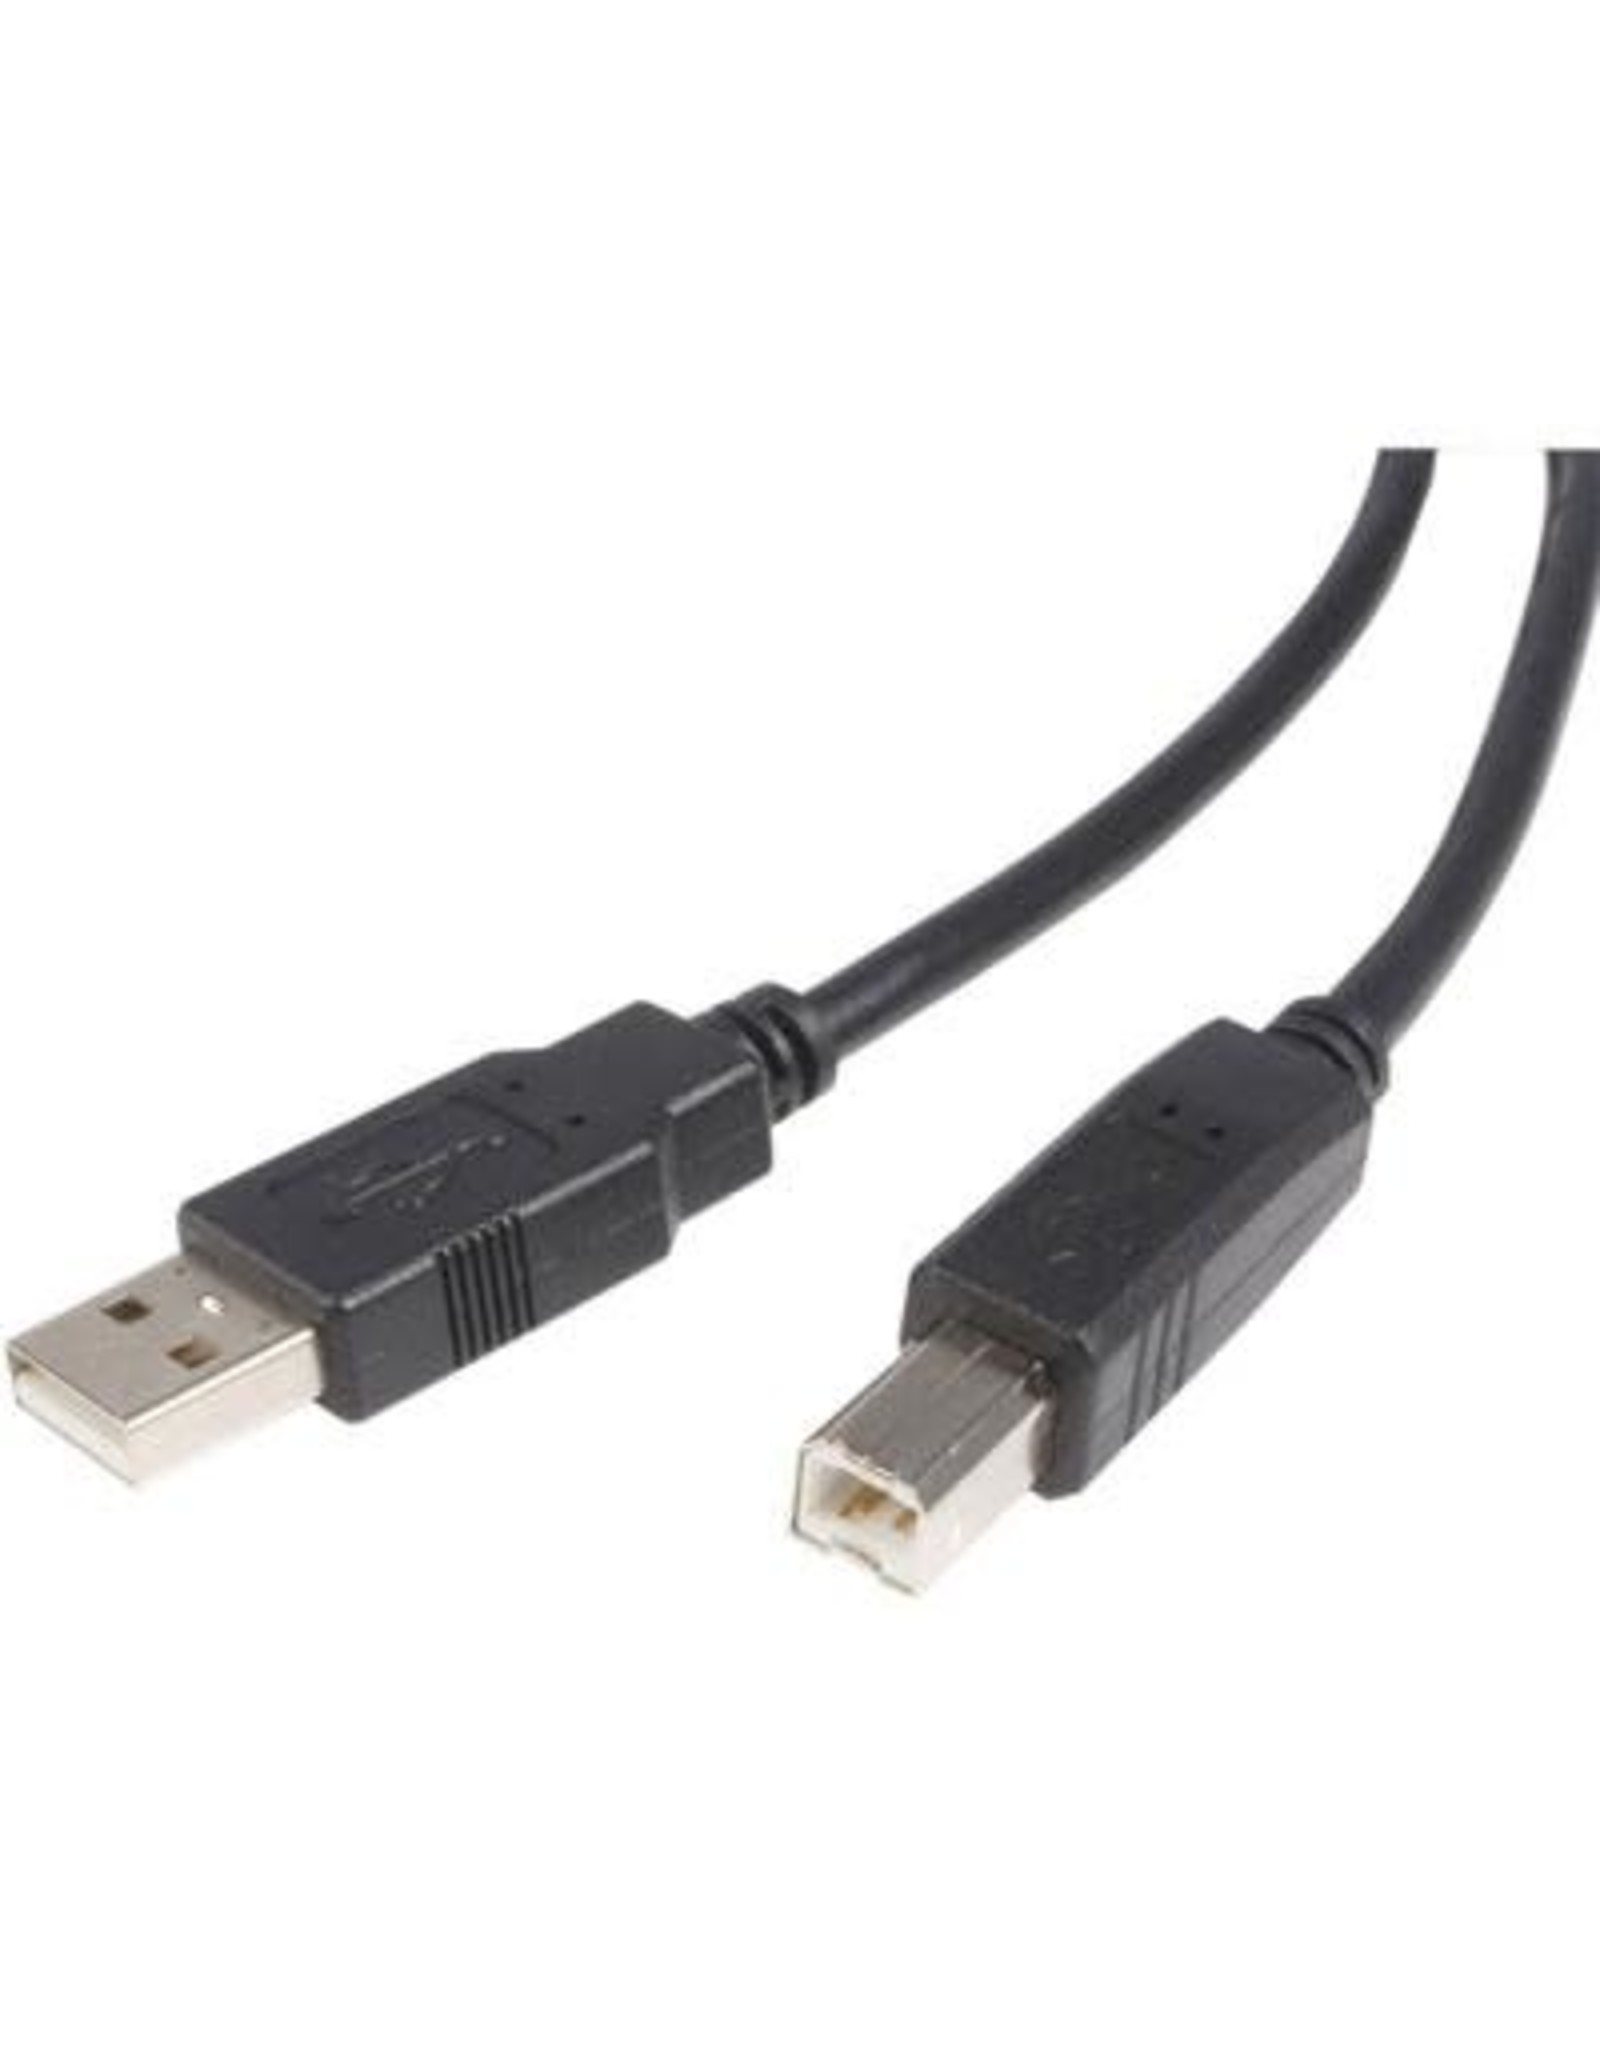 Startech 3 FT USB 2.0 CERTIFIED A TO B CABLE M/M